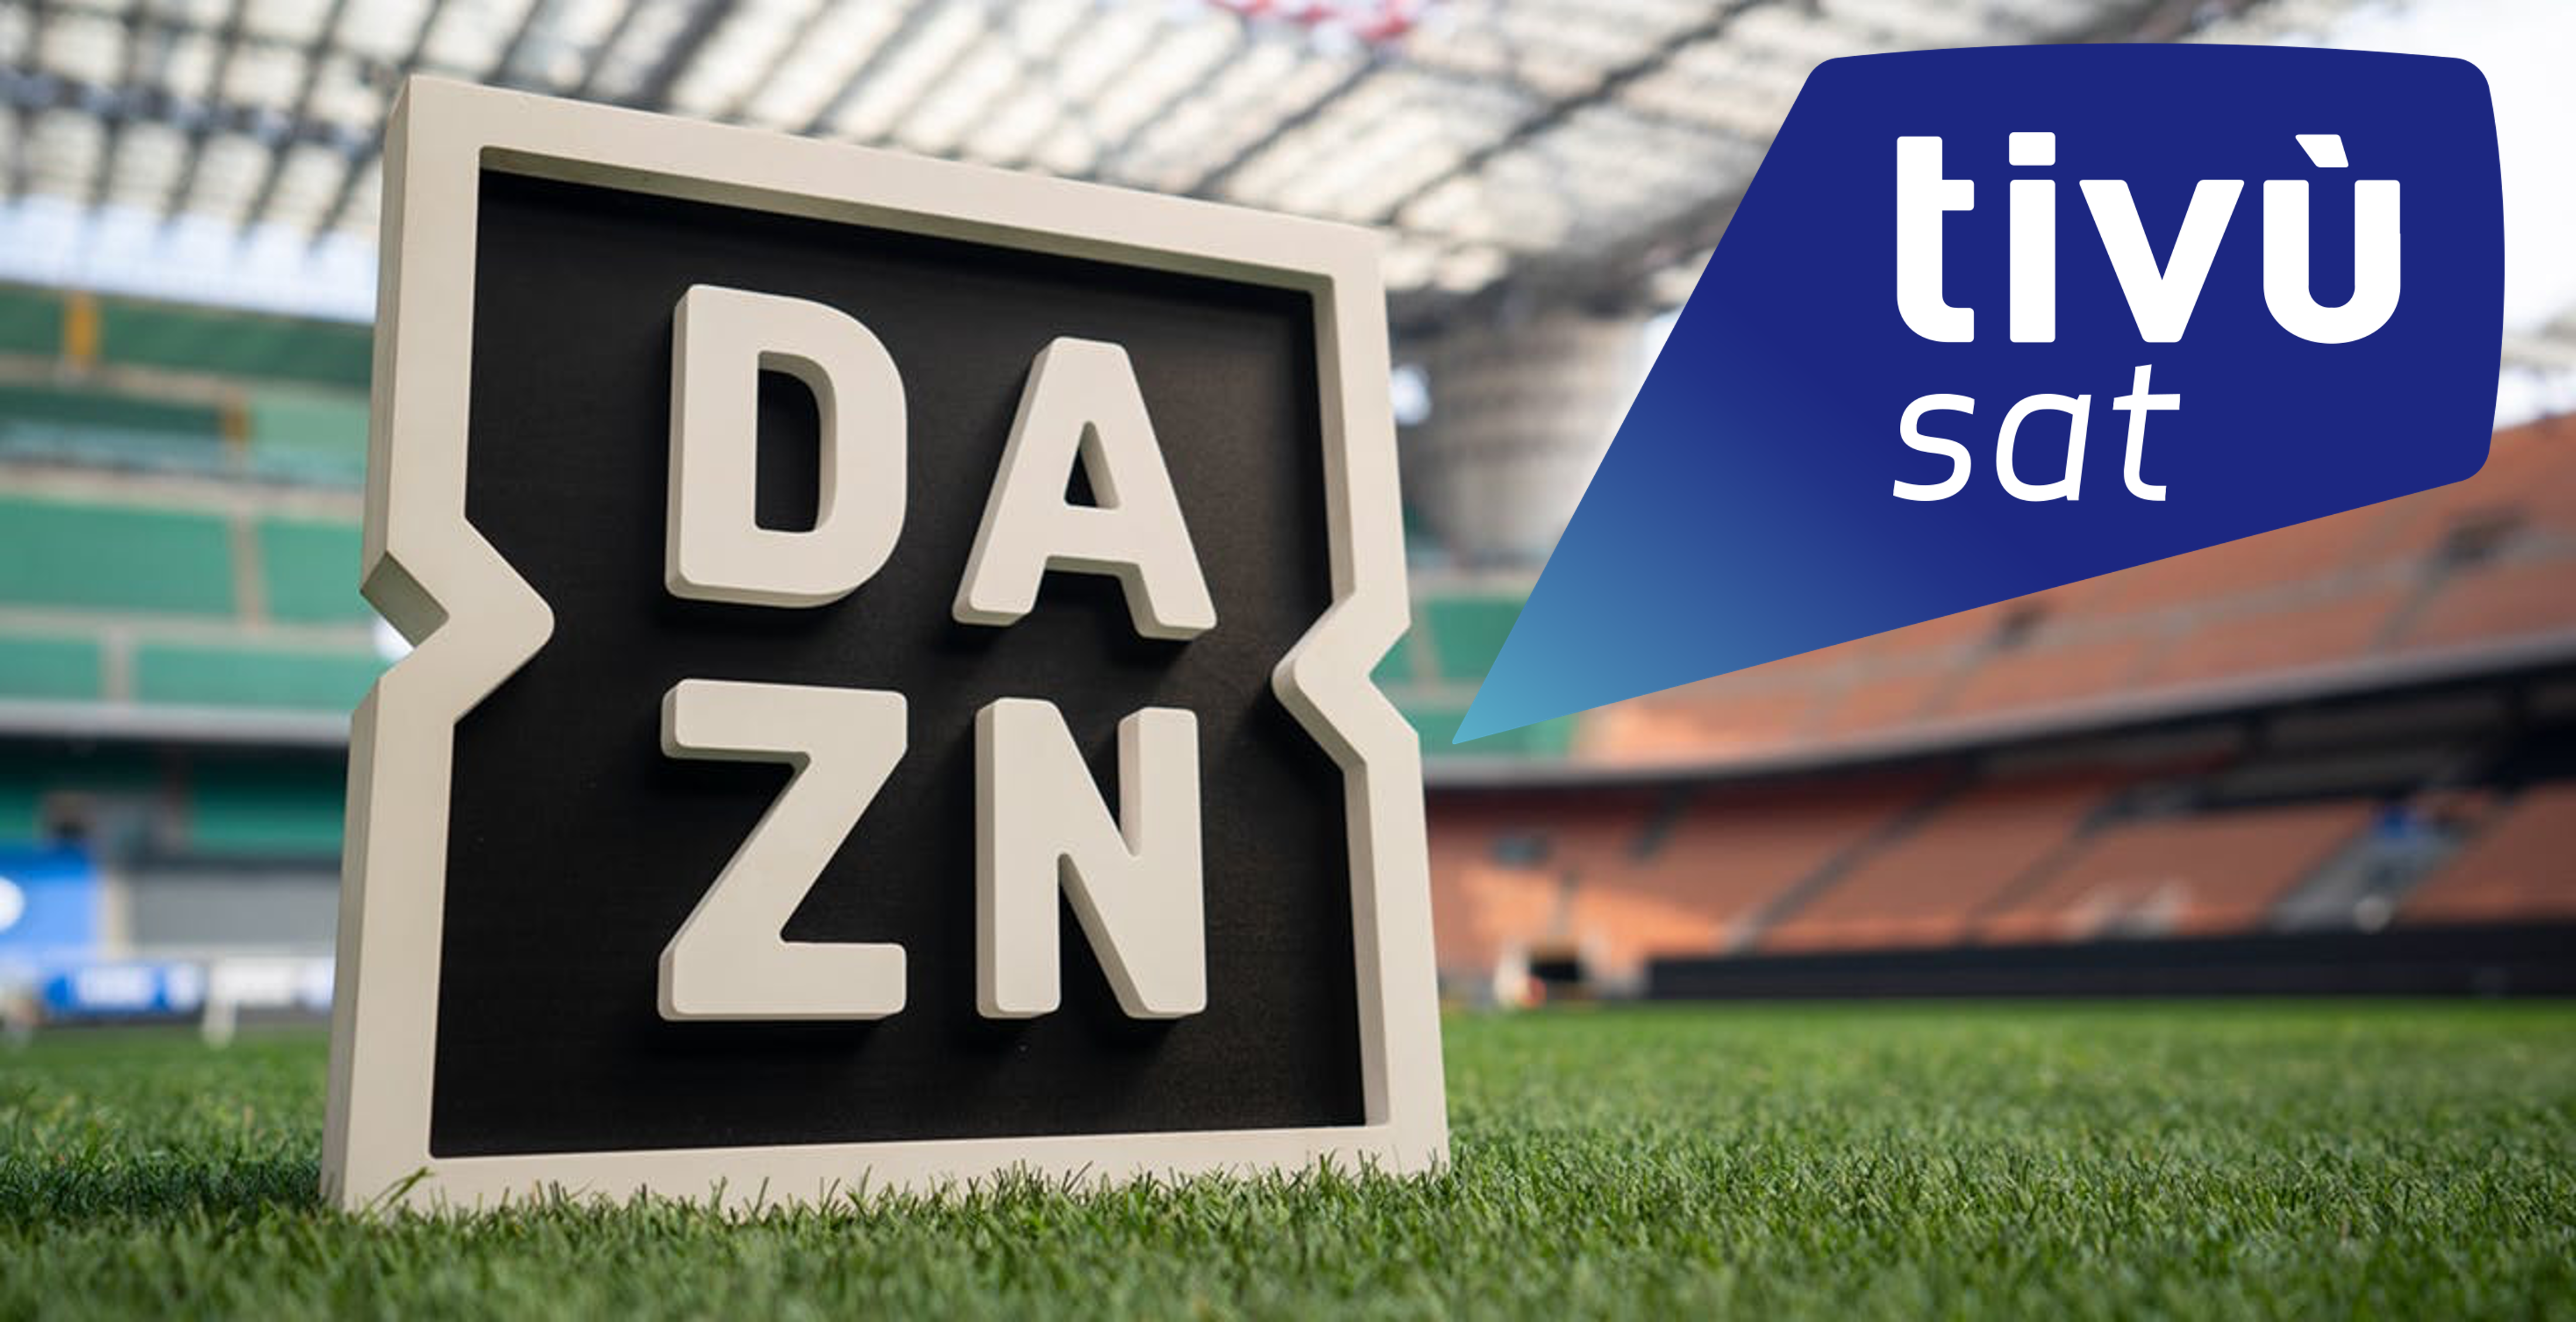 Tivù Srl Extends Service Lineup to Bring Customers NAGRA Secured DAZN Sports Content